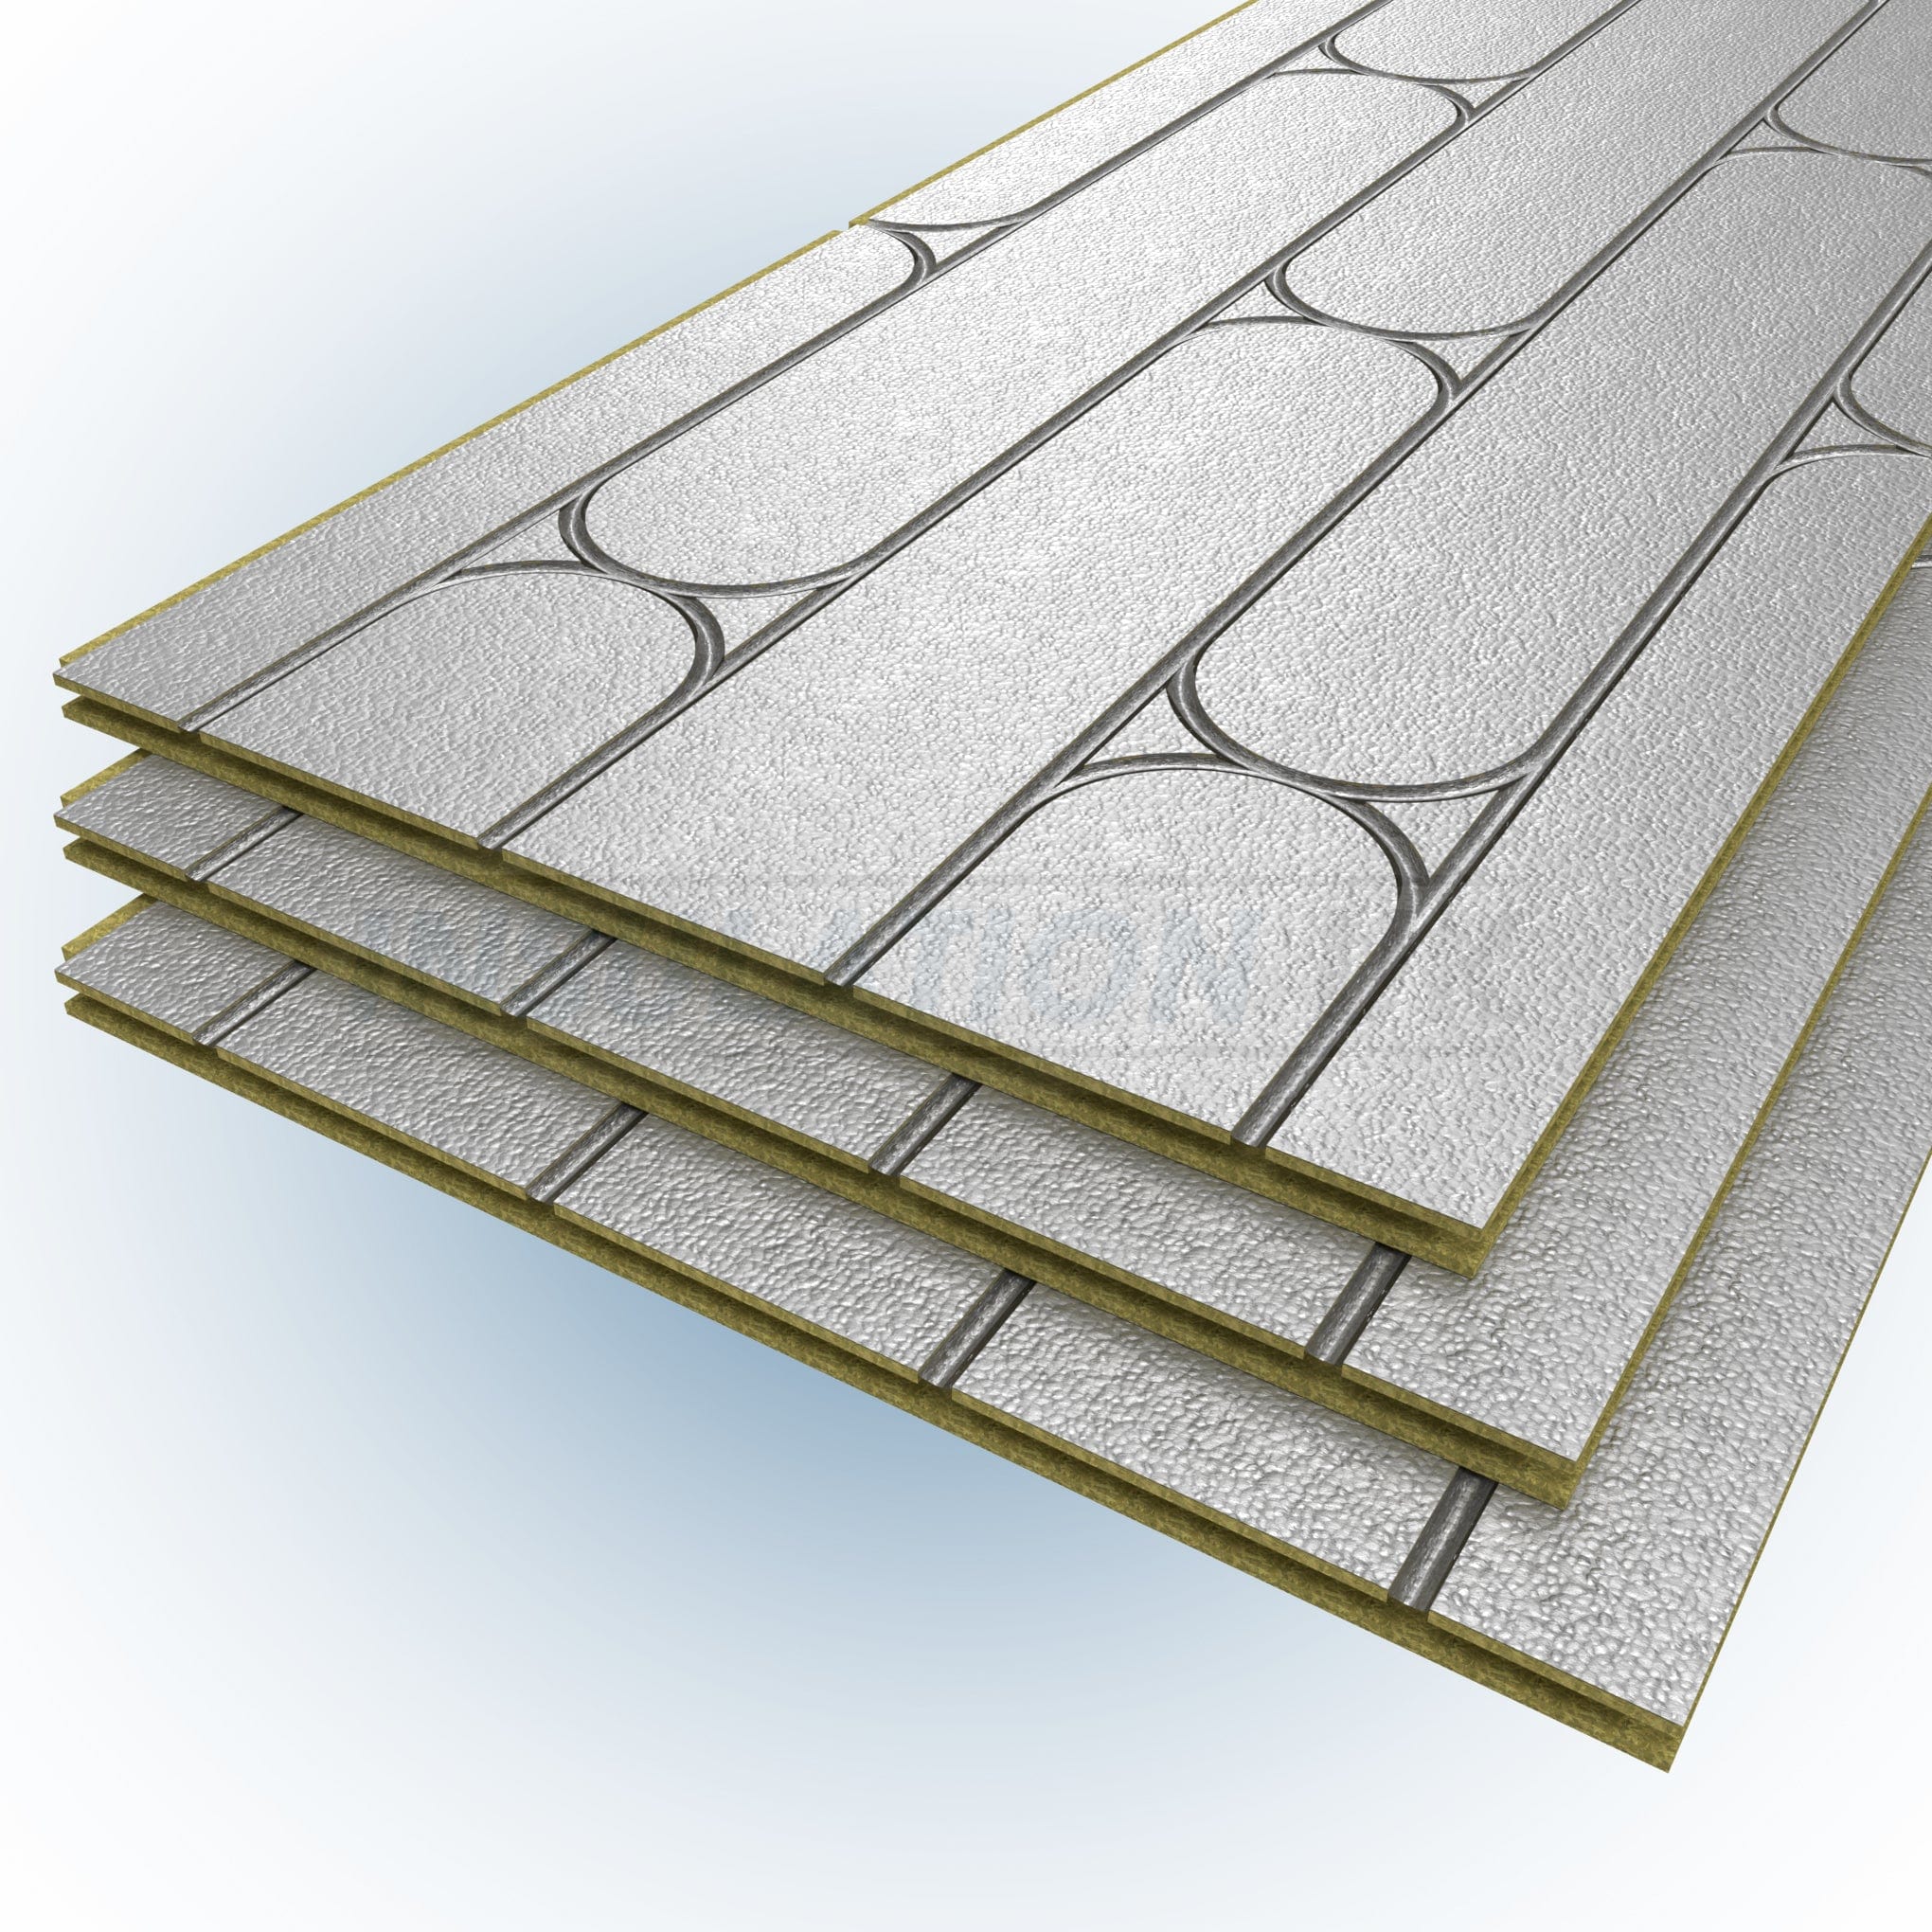 Tekwarm Insulation Tekwarm Routed Foil Faced Chipboard UFH Panel | 2400mm x 600mm x 22mm IUK01522